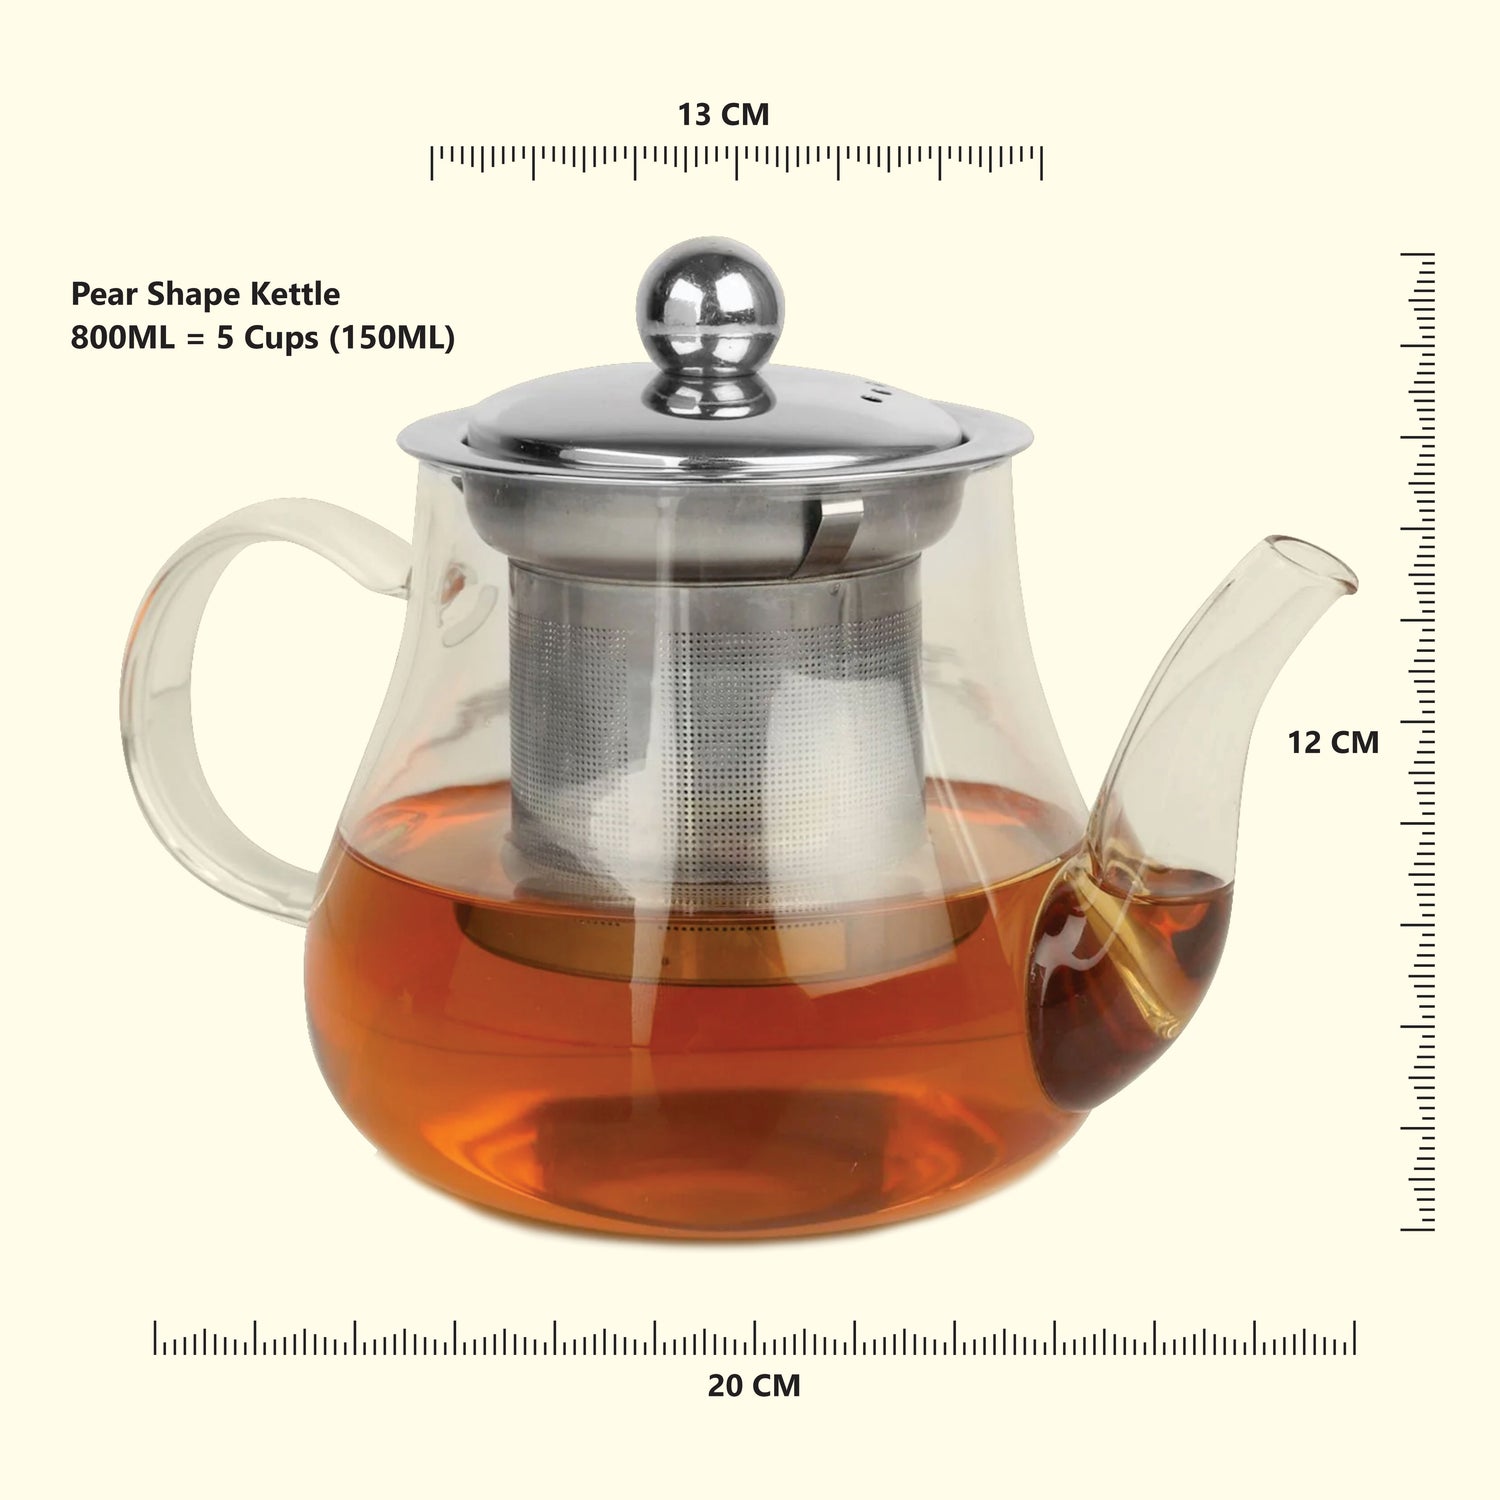 Pear Shaped Borosilicate Glass Kettle with Steel Infuser-Large 800ML